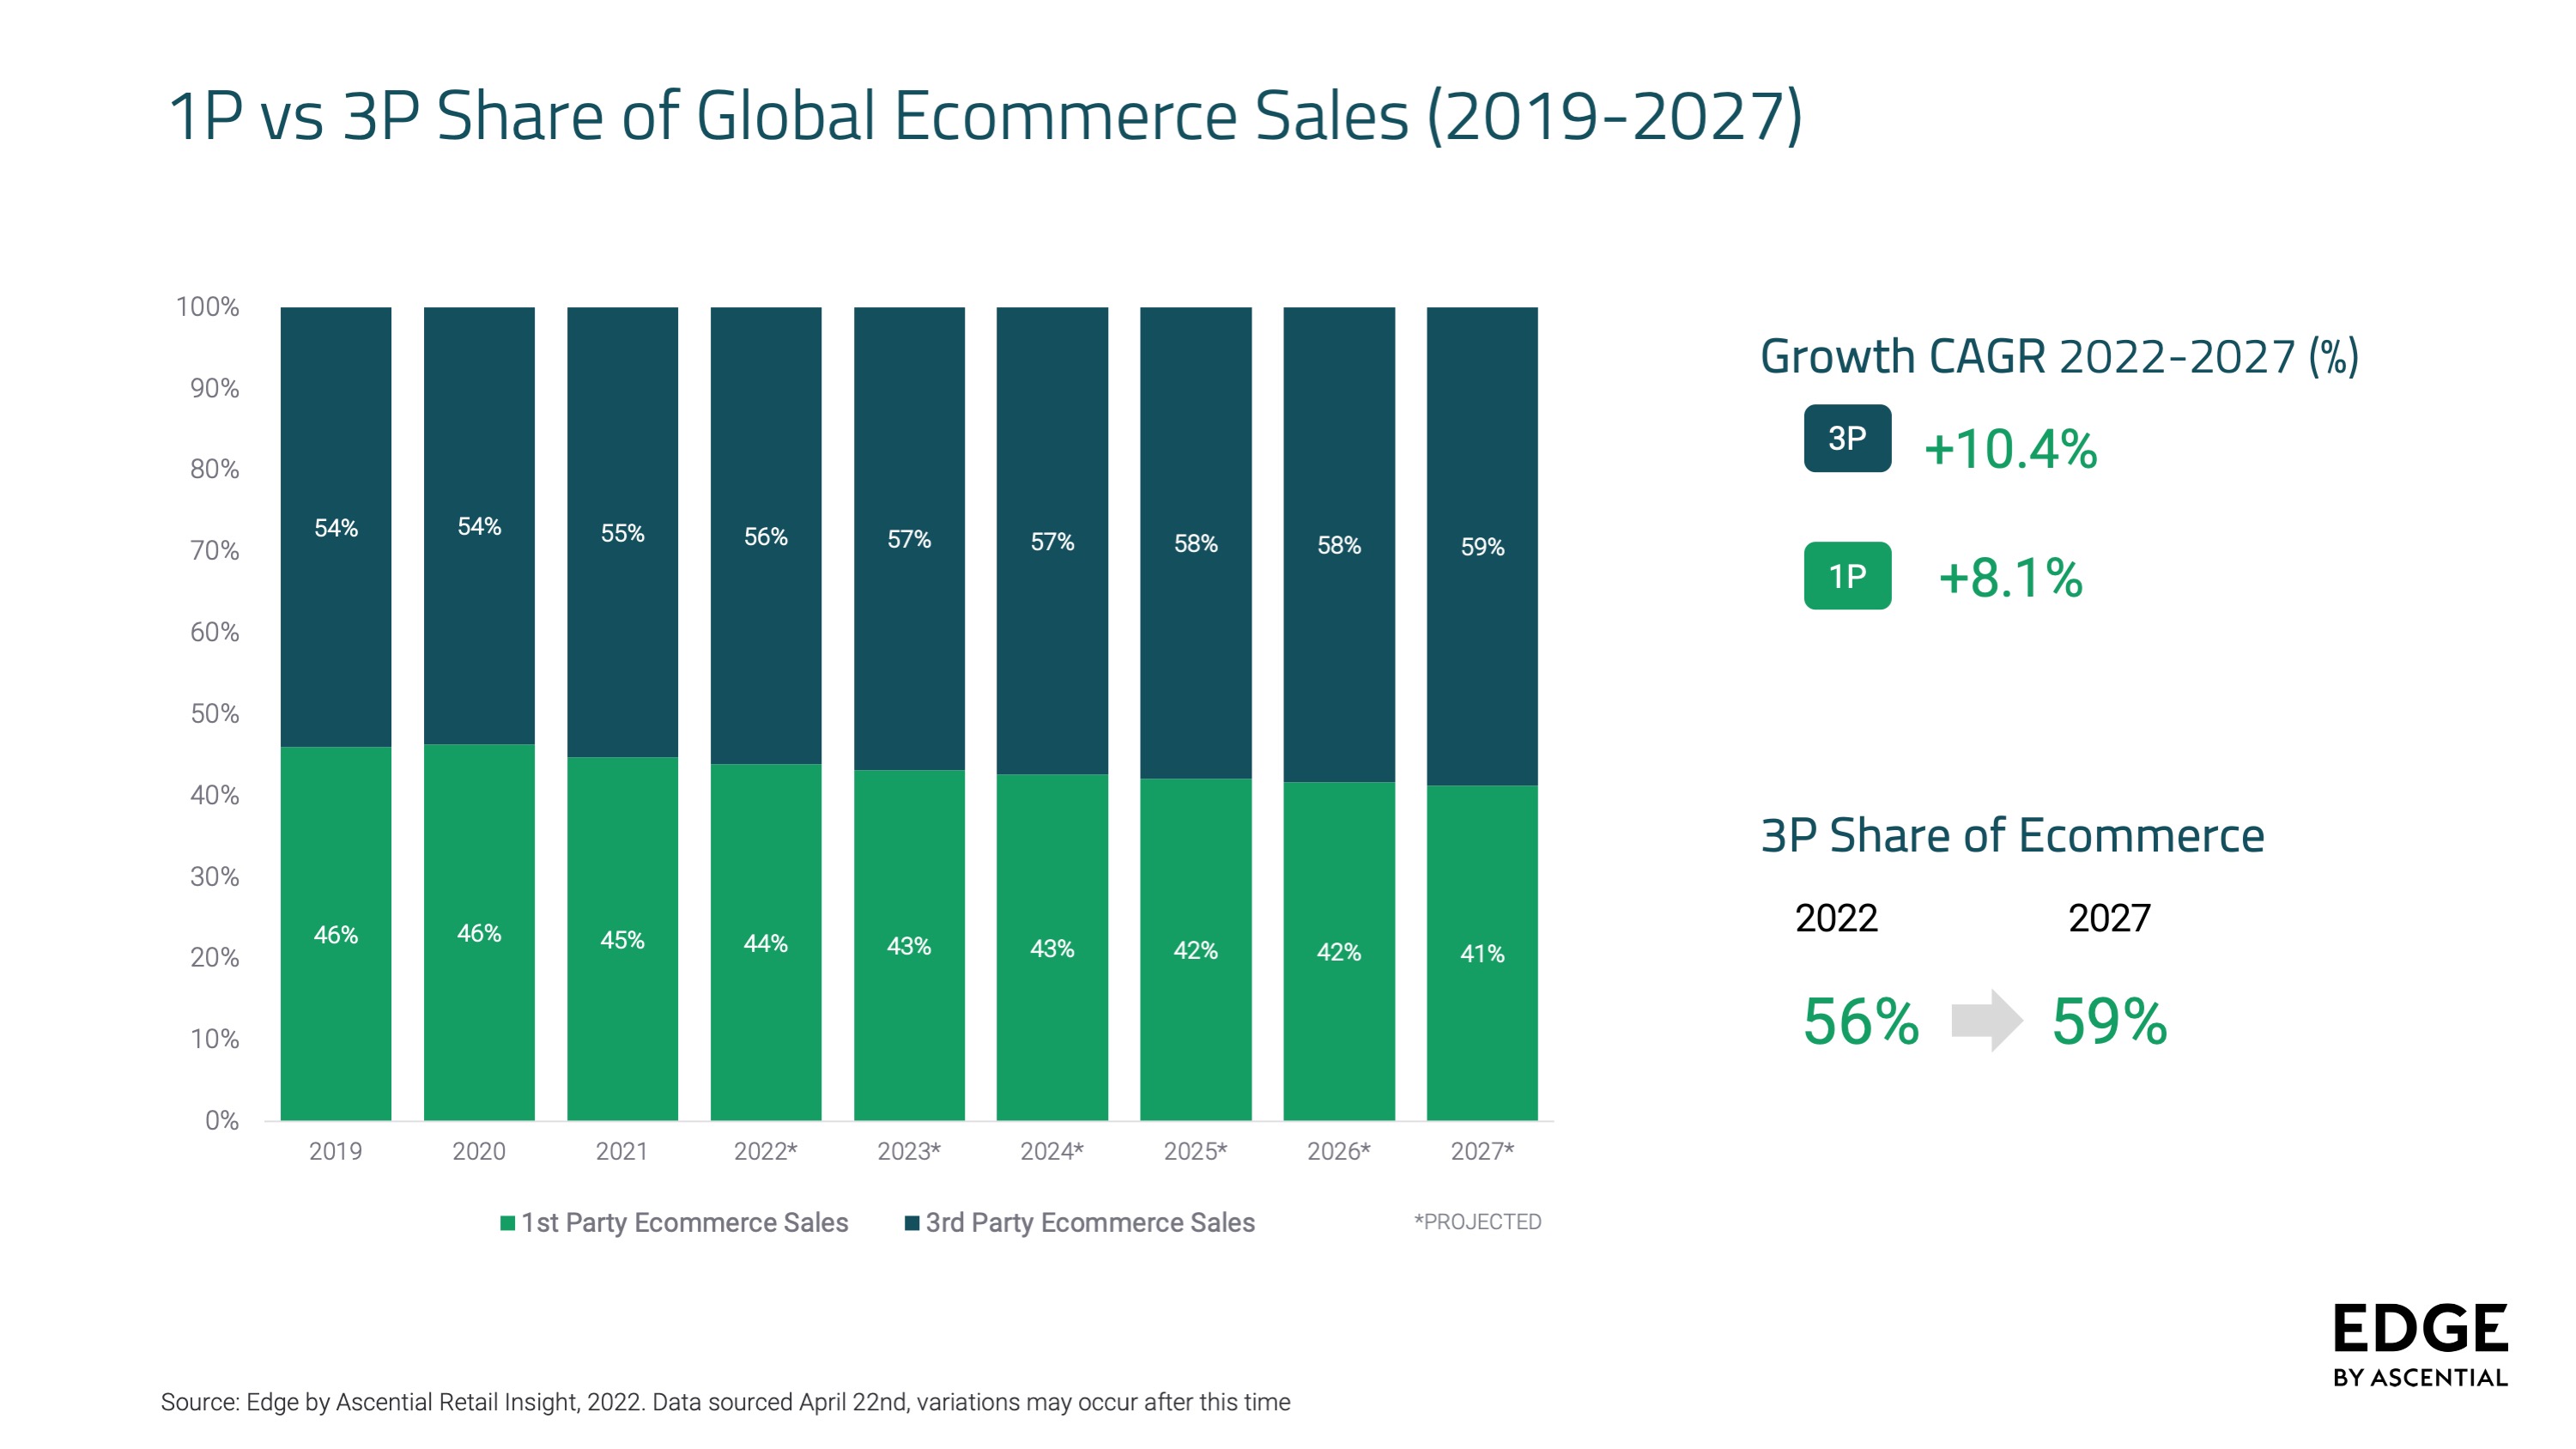 1P vs 3P Share of Global Ecommerce Sales (2019-2027)